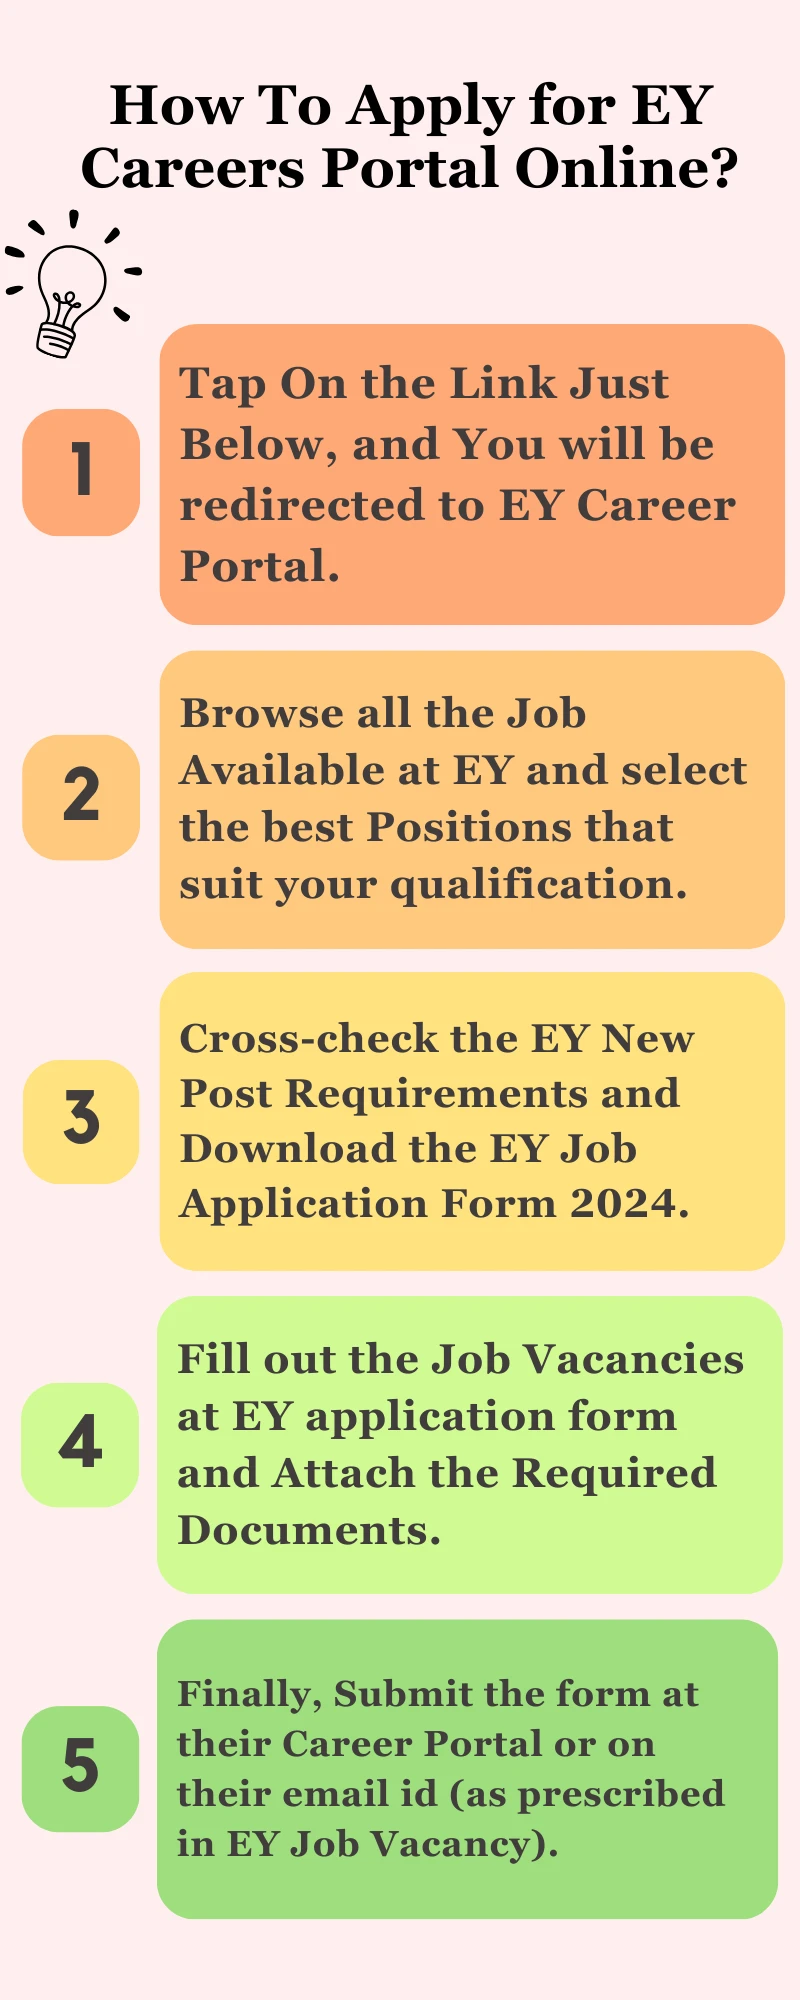 How To Apply for EY Careers Portal Online?